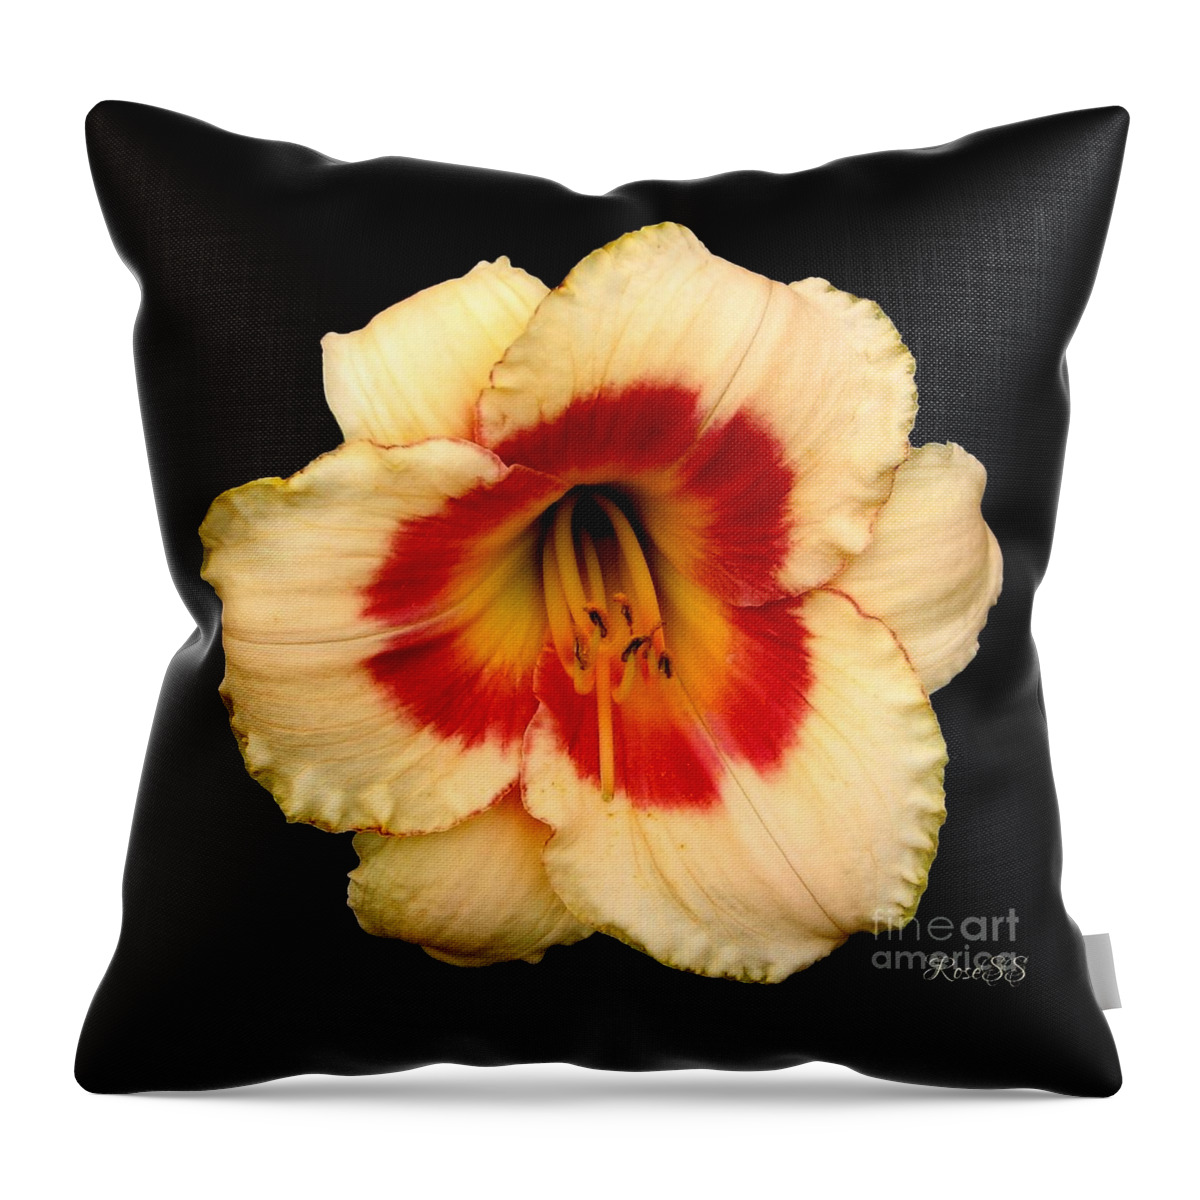 Daylily Throw Pillow featuring the photograph Daylily 3 by Rose Santuci-Sofranko